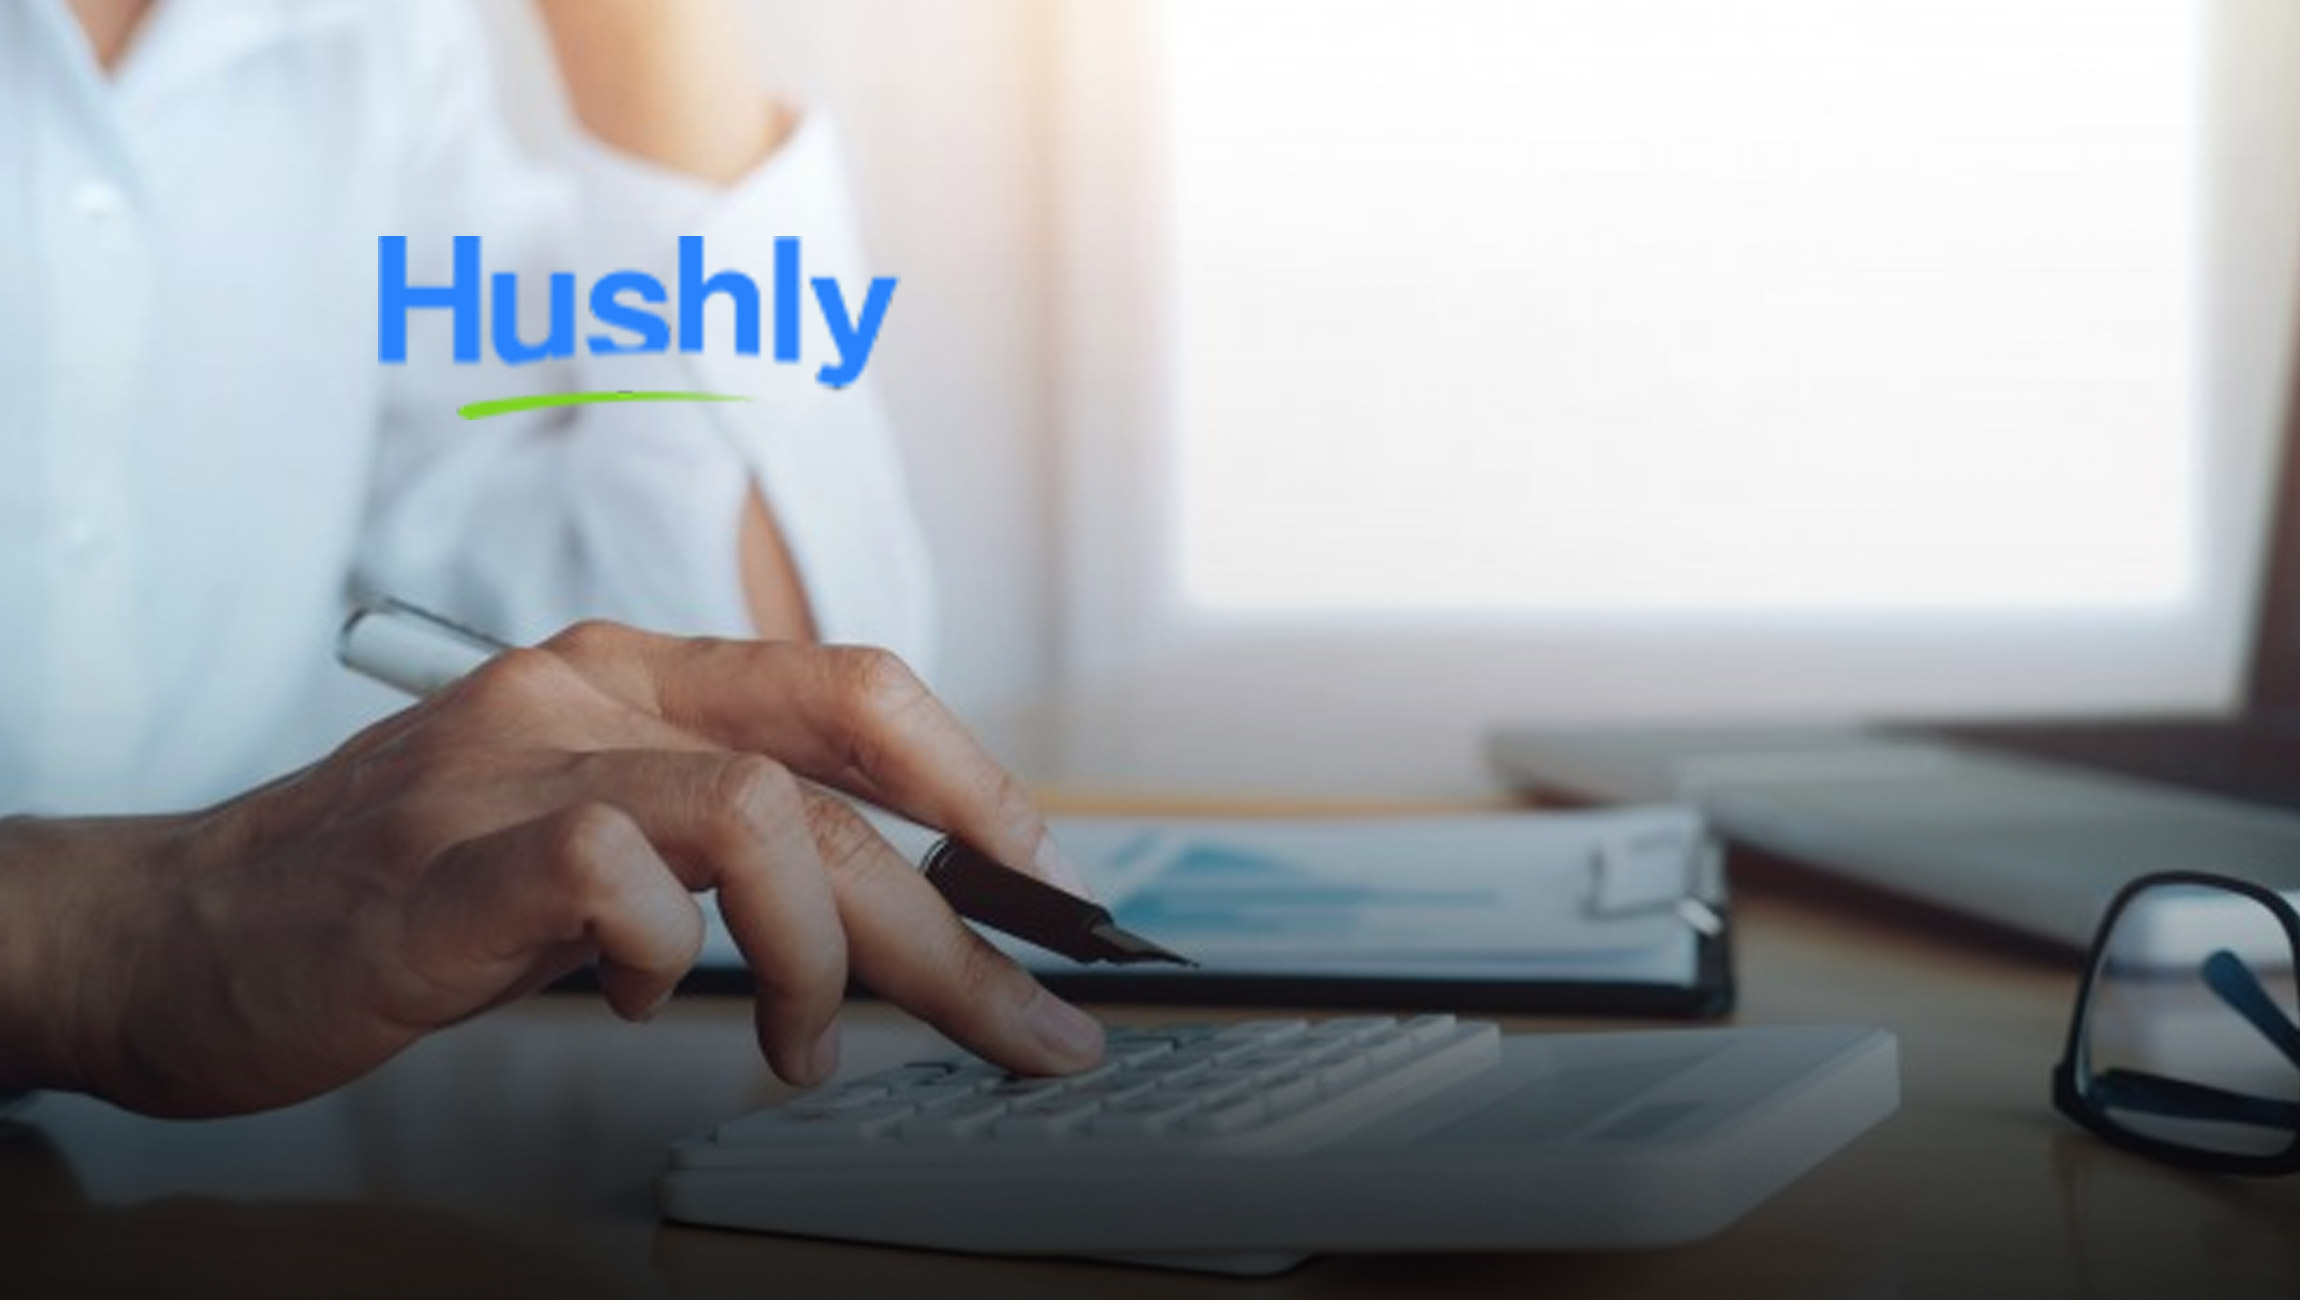 Hushly Launches Templatized ABM Campaign Pages for Easy Account-Focused Marketing